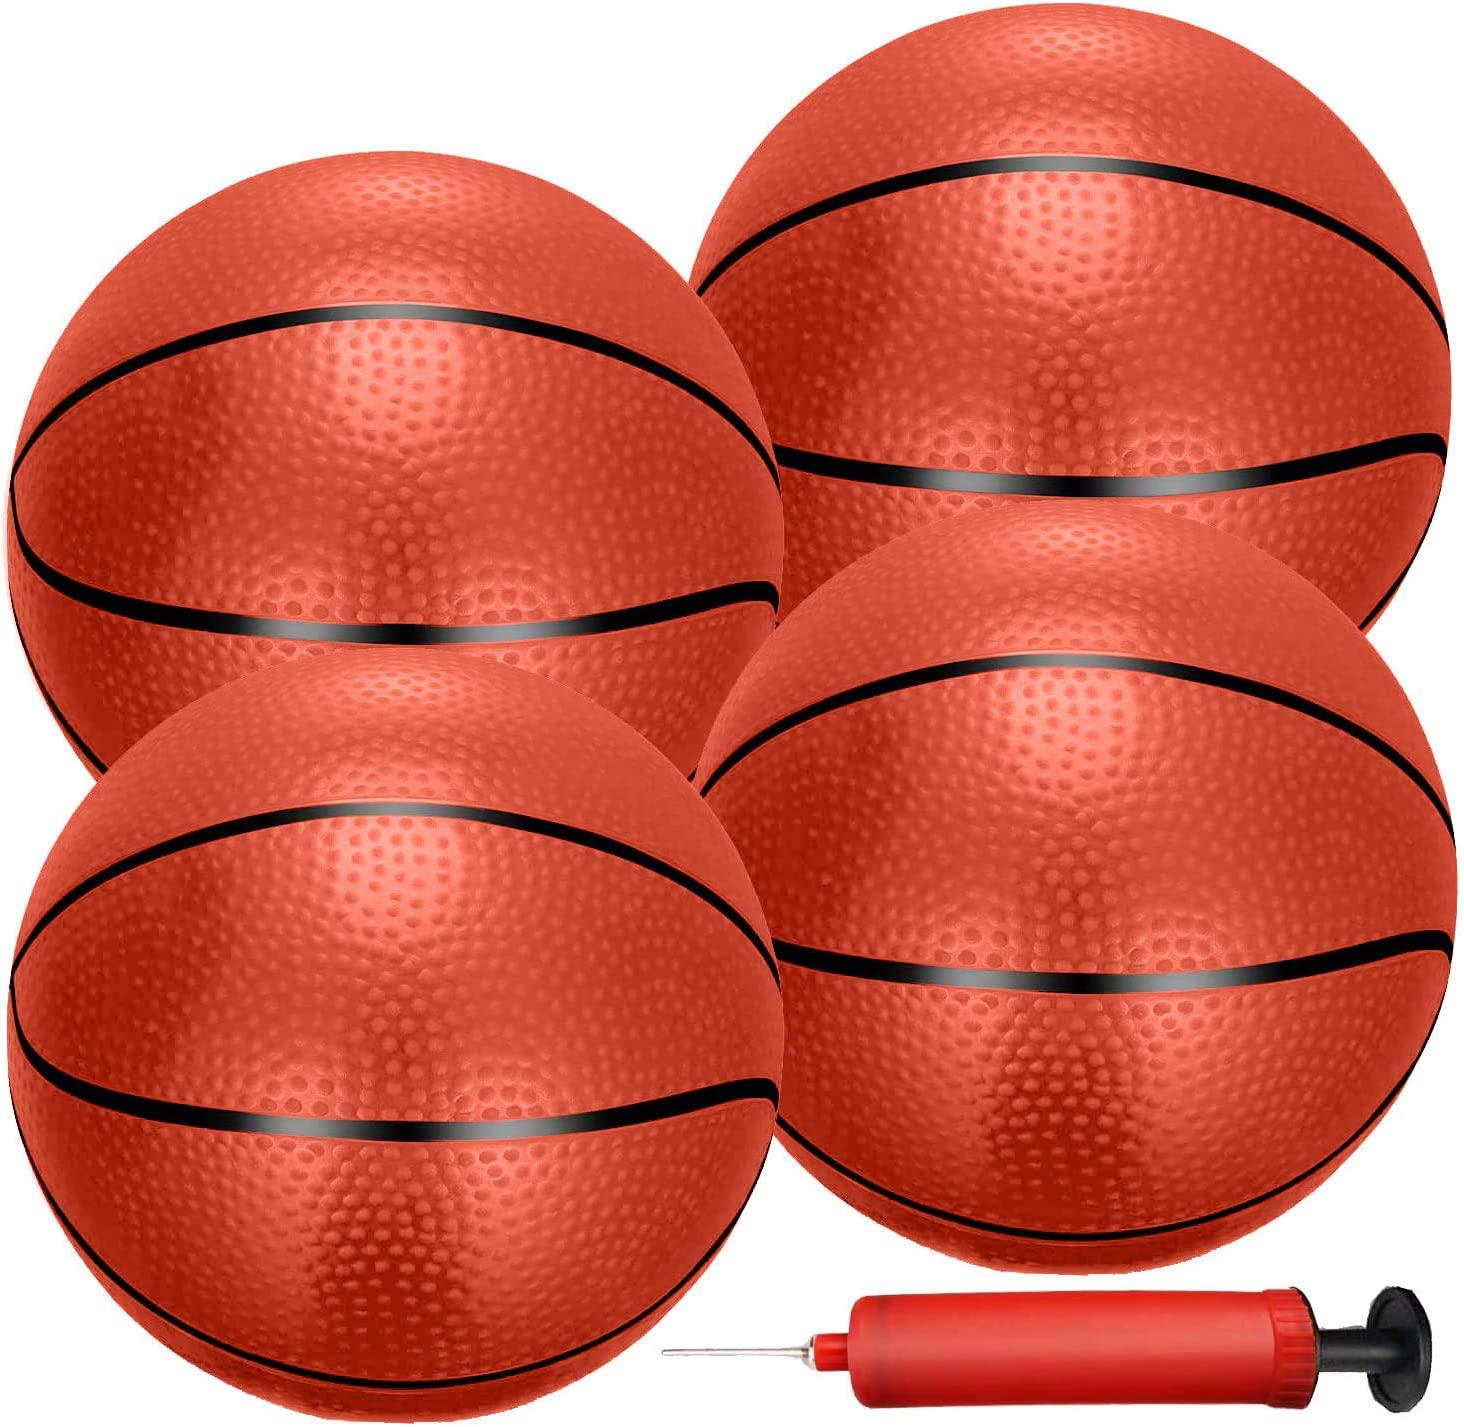 Liberty Imports, Liberty Imports 4 PCS Inflatable Mini Basketball Toy Replacement Rubber Balls with Pump and Needle for Indoor Toy Miniature Hoop or Sports Training (6 Inch)